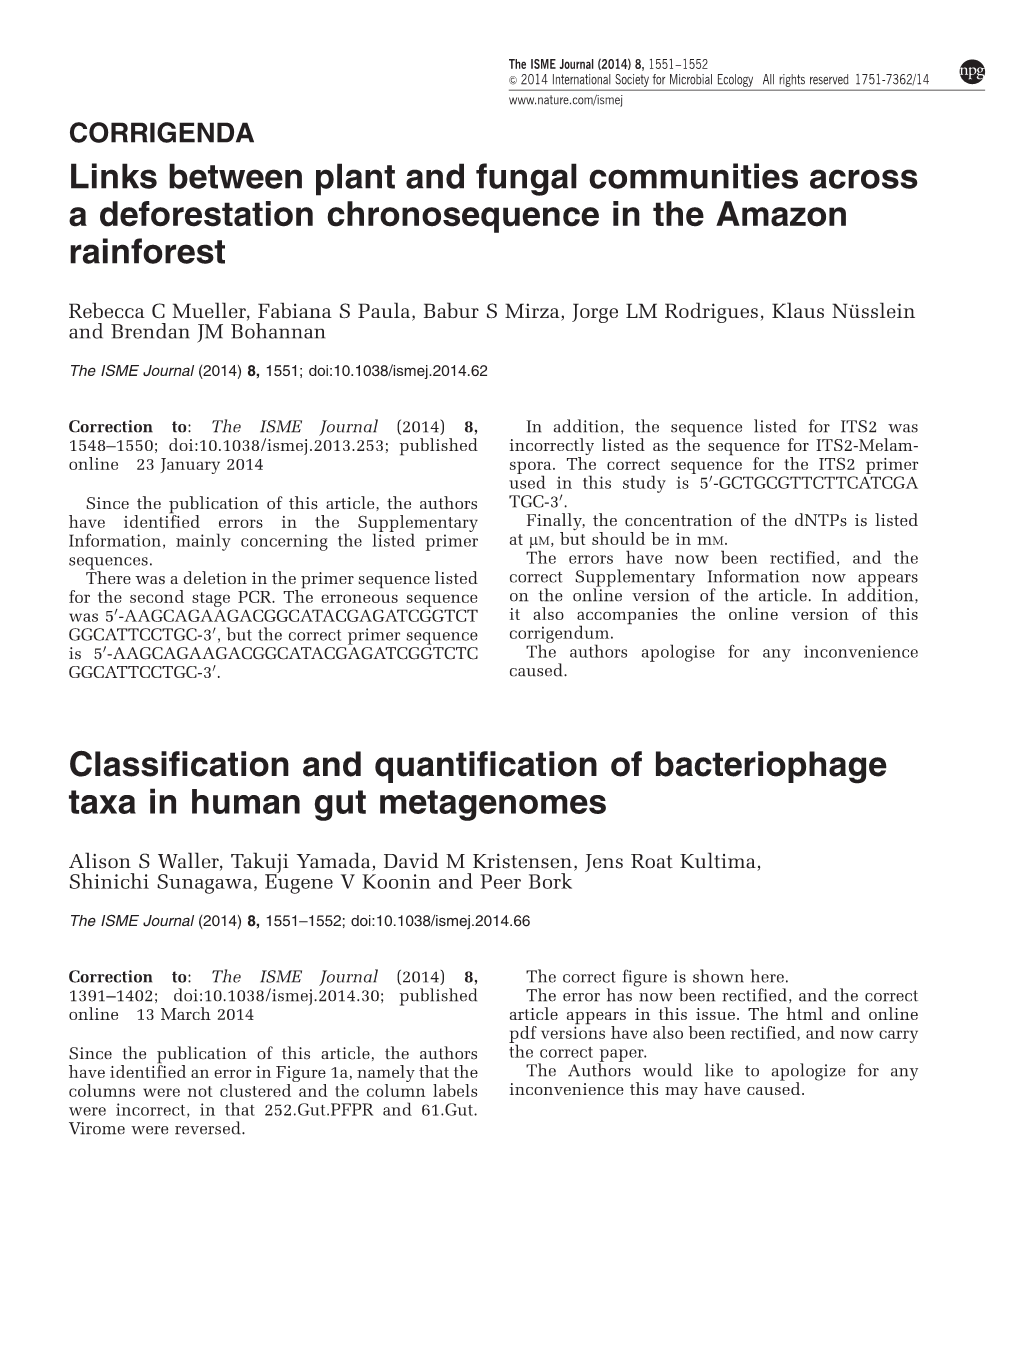 Classification and Quantification of Bacteriophage Taxa in Human Gut Metagenomes